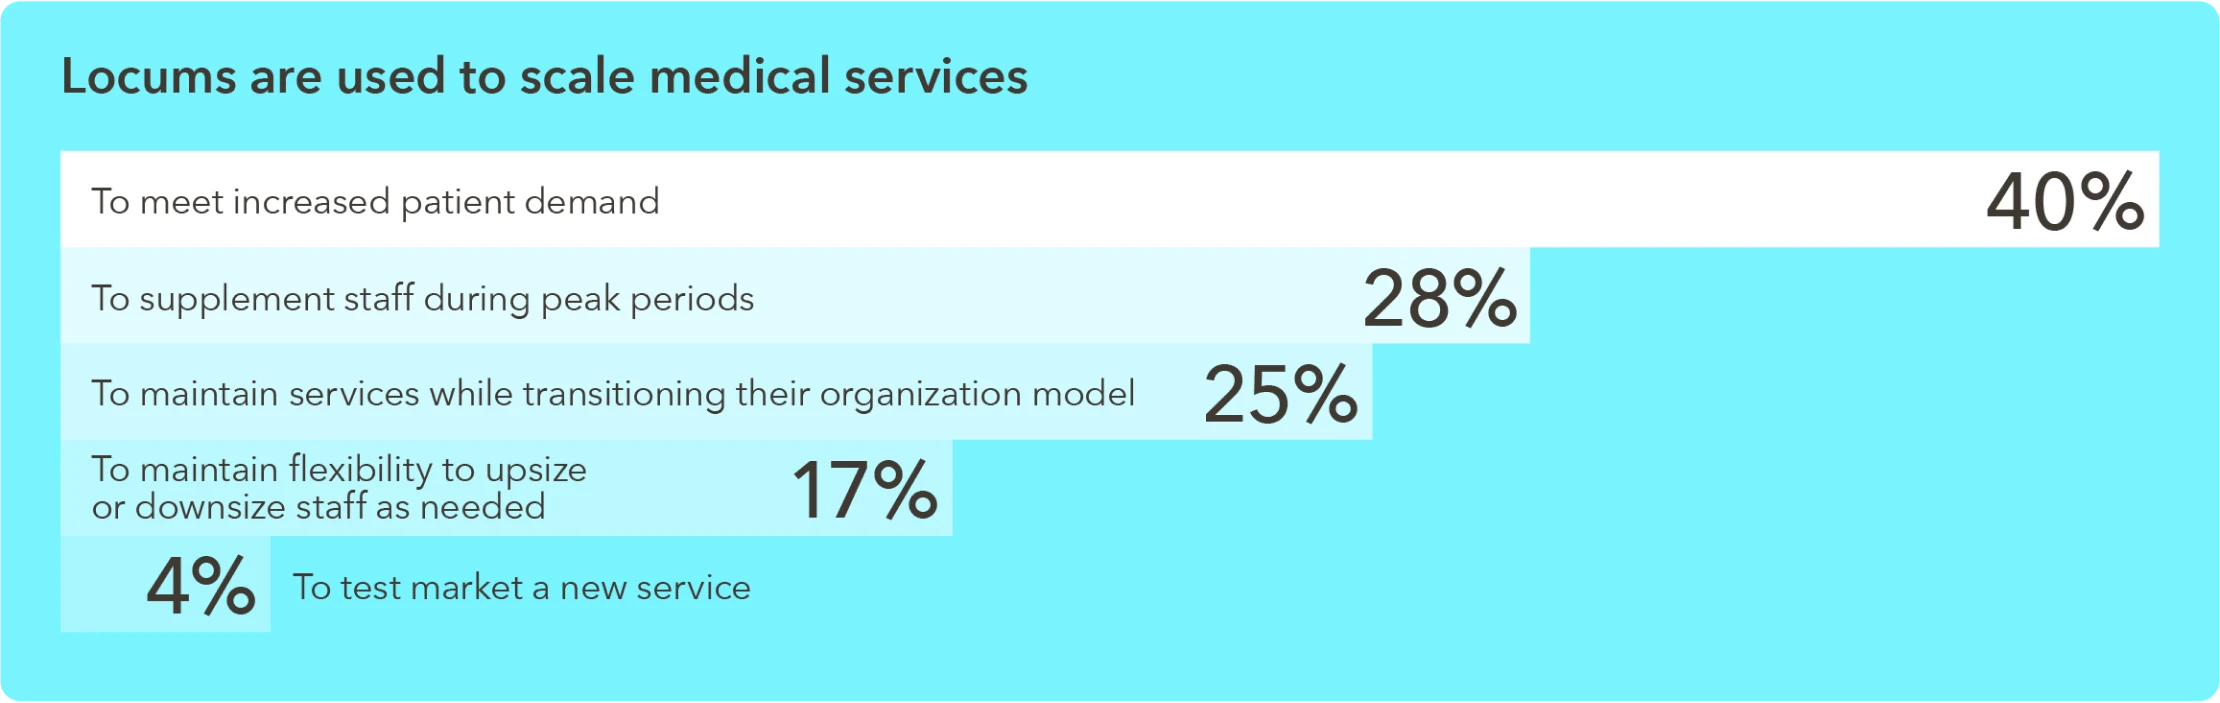 Chart - Percent of healthcare organizations that use locums to scale medical services